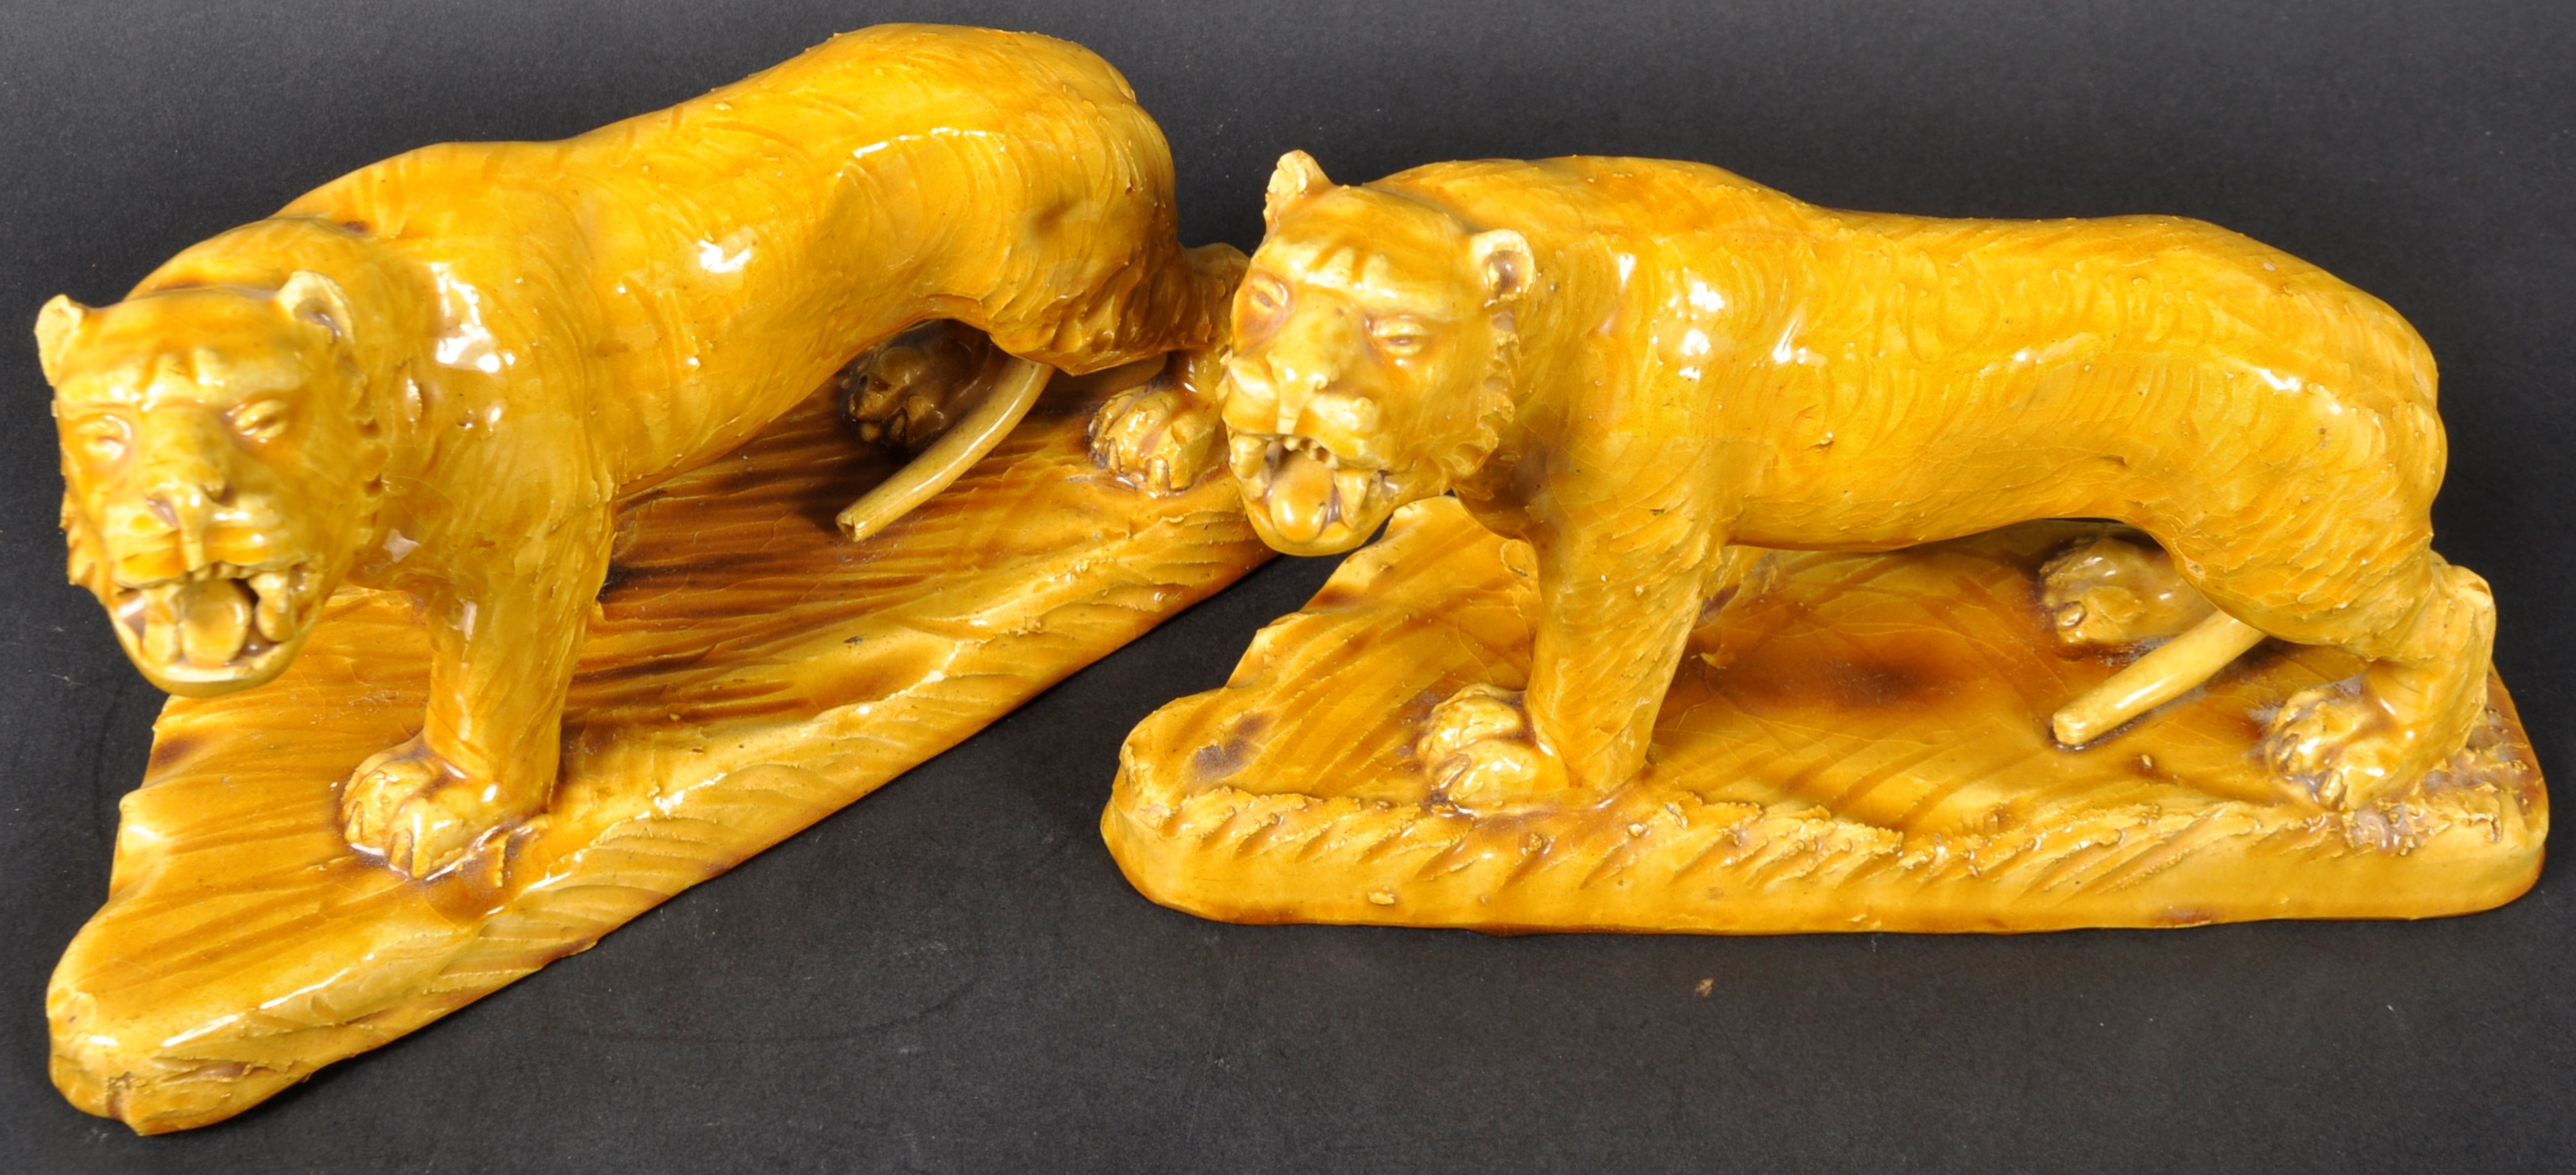 PAIR OF 19TH CENTURY VICTORIAN GLAZED CERAMIC PROWLING TIGERS - Image 2 of 9